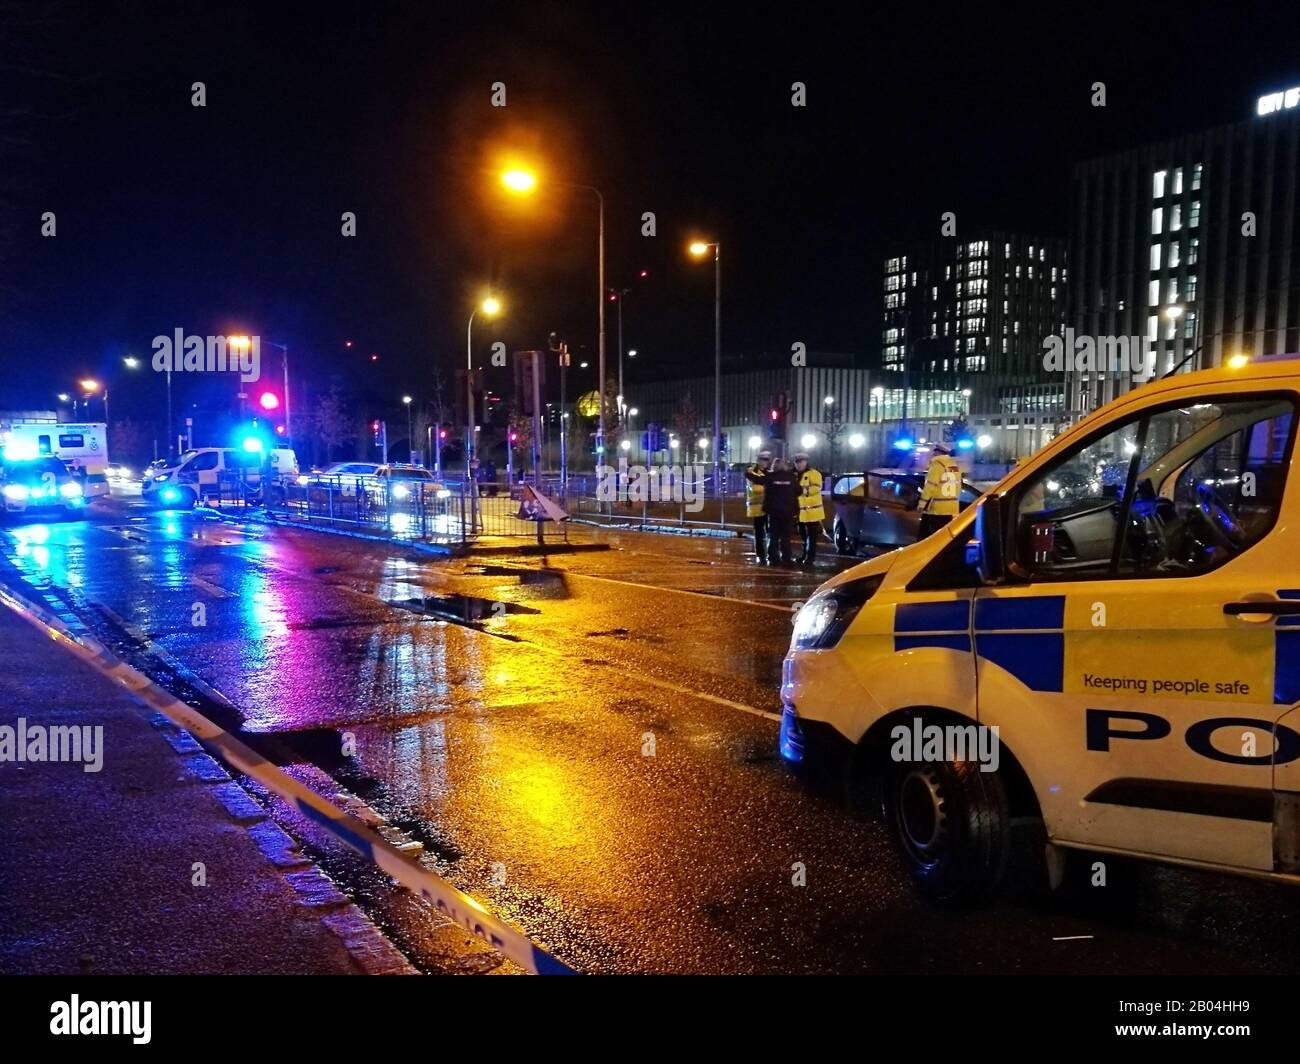 Glasgow, UK. 18th Feb, 2020. Police and ambulance services attending a road accident on Ballater street near Glasgow Health Club in Glasgow. Access from Crown street closed. Credit: Alamy News/Pawel Pietraszewski Credit: Pawel Pietraszewski/Alamy Live News Stock Photo